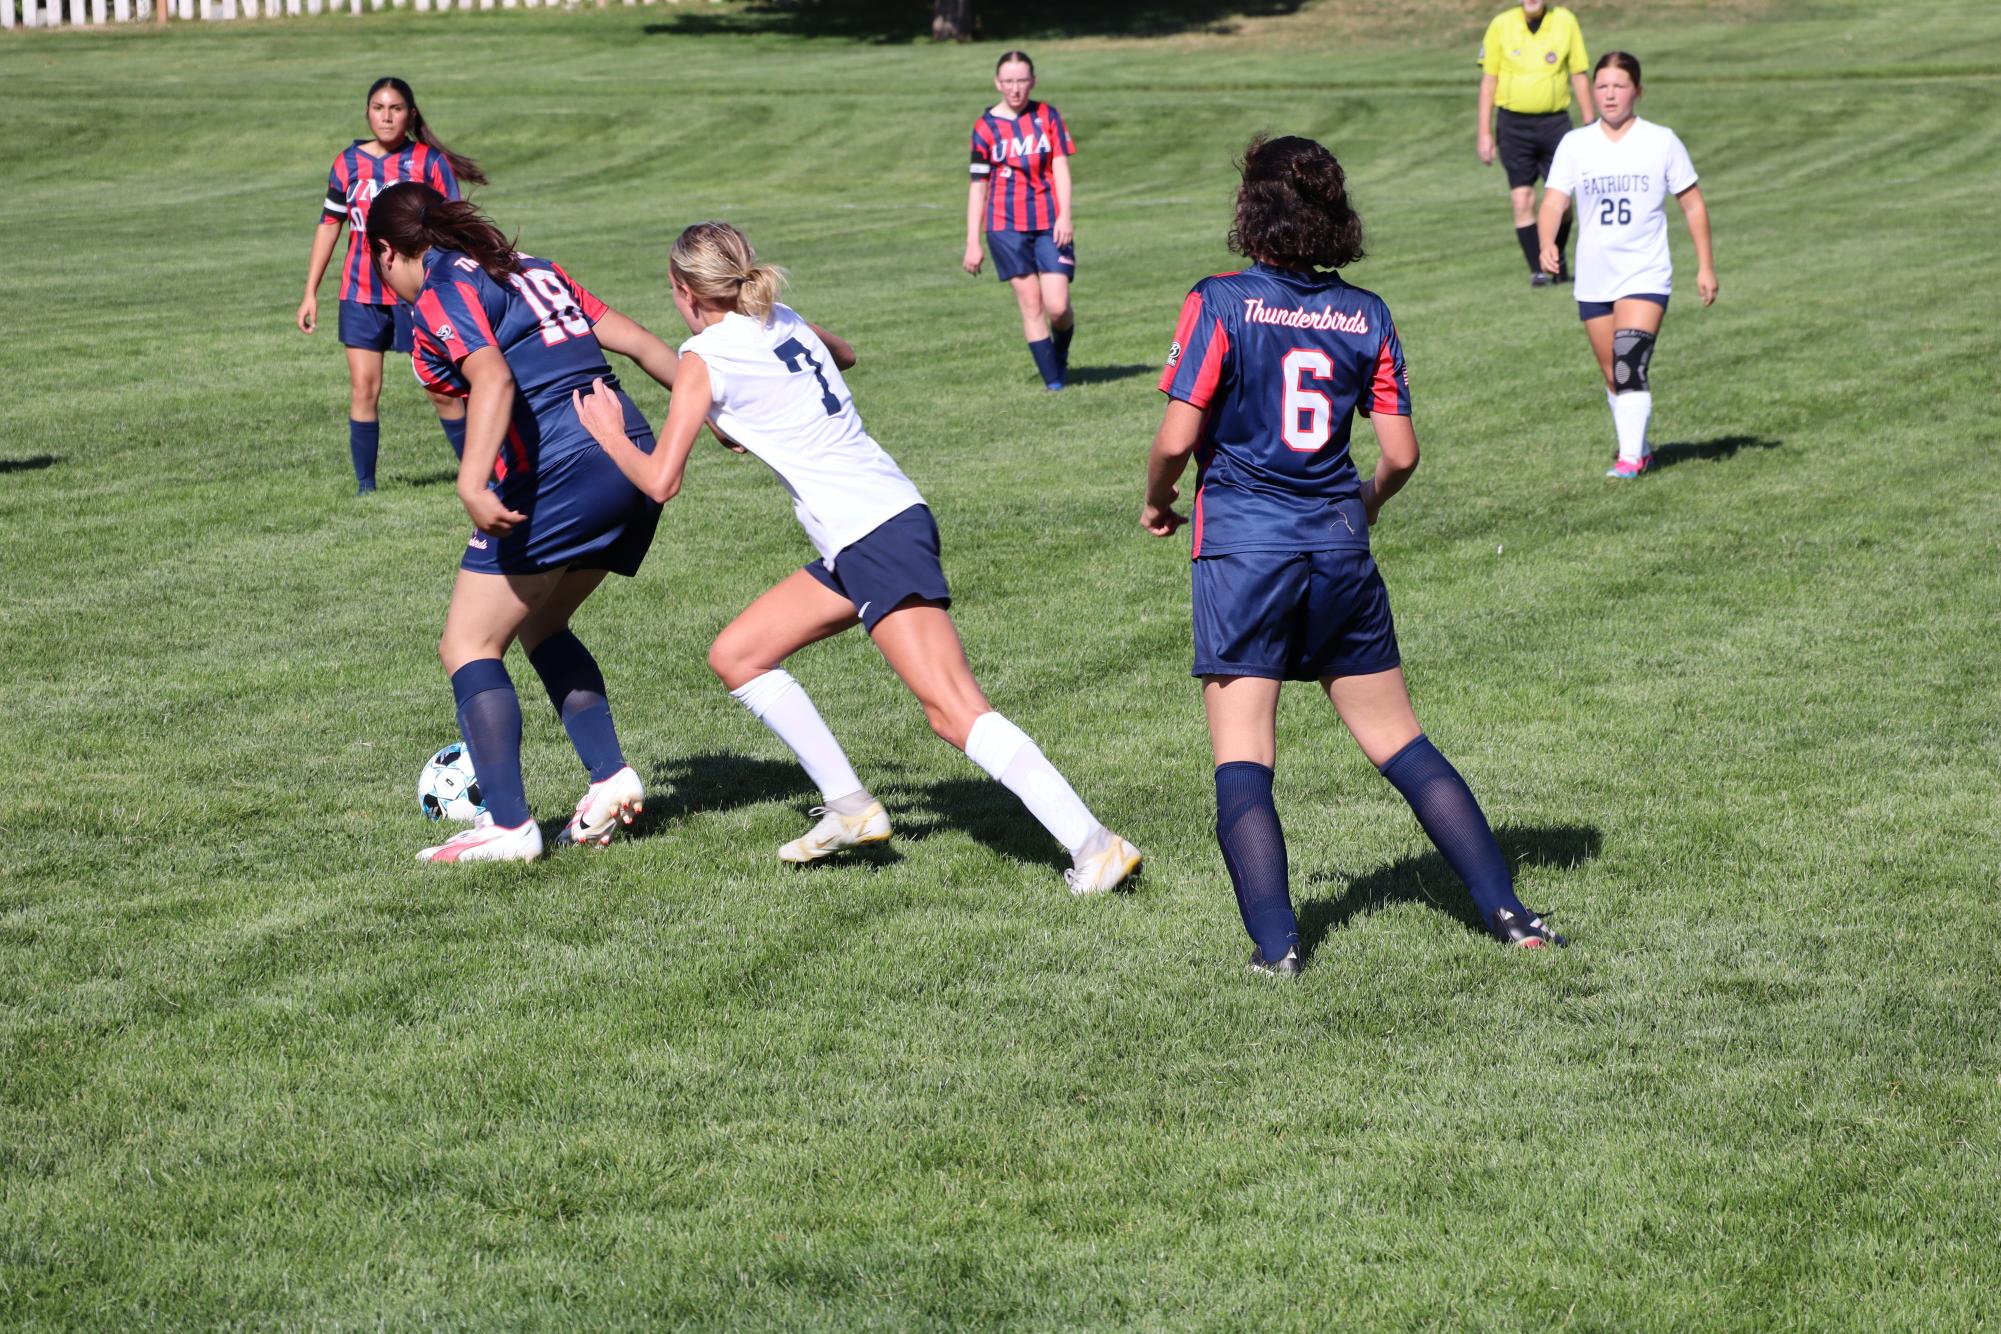 HS Girls Soccer face off in the field with a rival school.